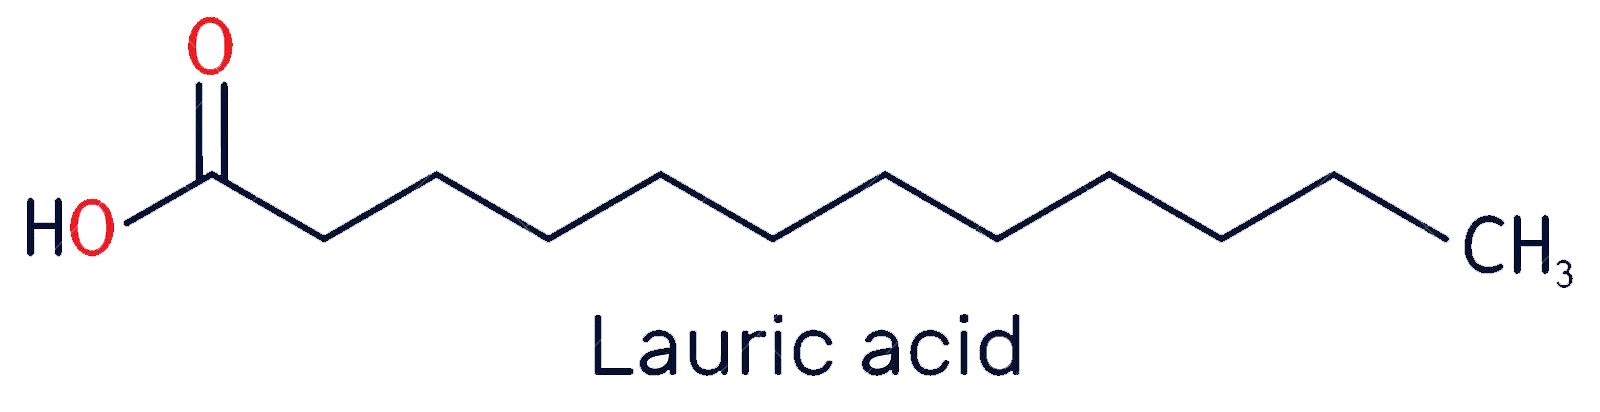 Lauric acid accounts for 45-50% of the fat in black soldier fly larvae, providing many health benefits to livestock.